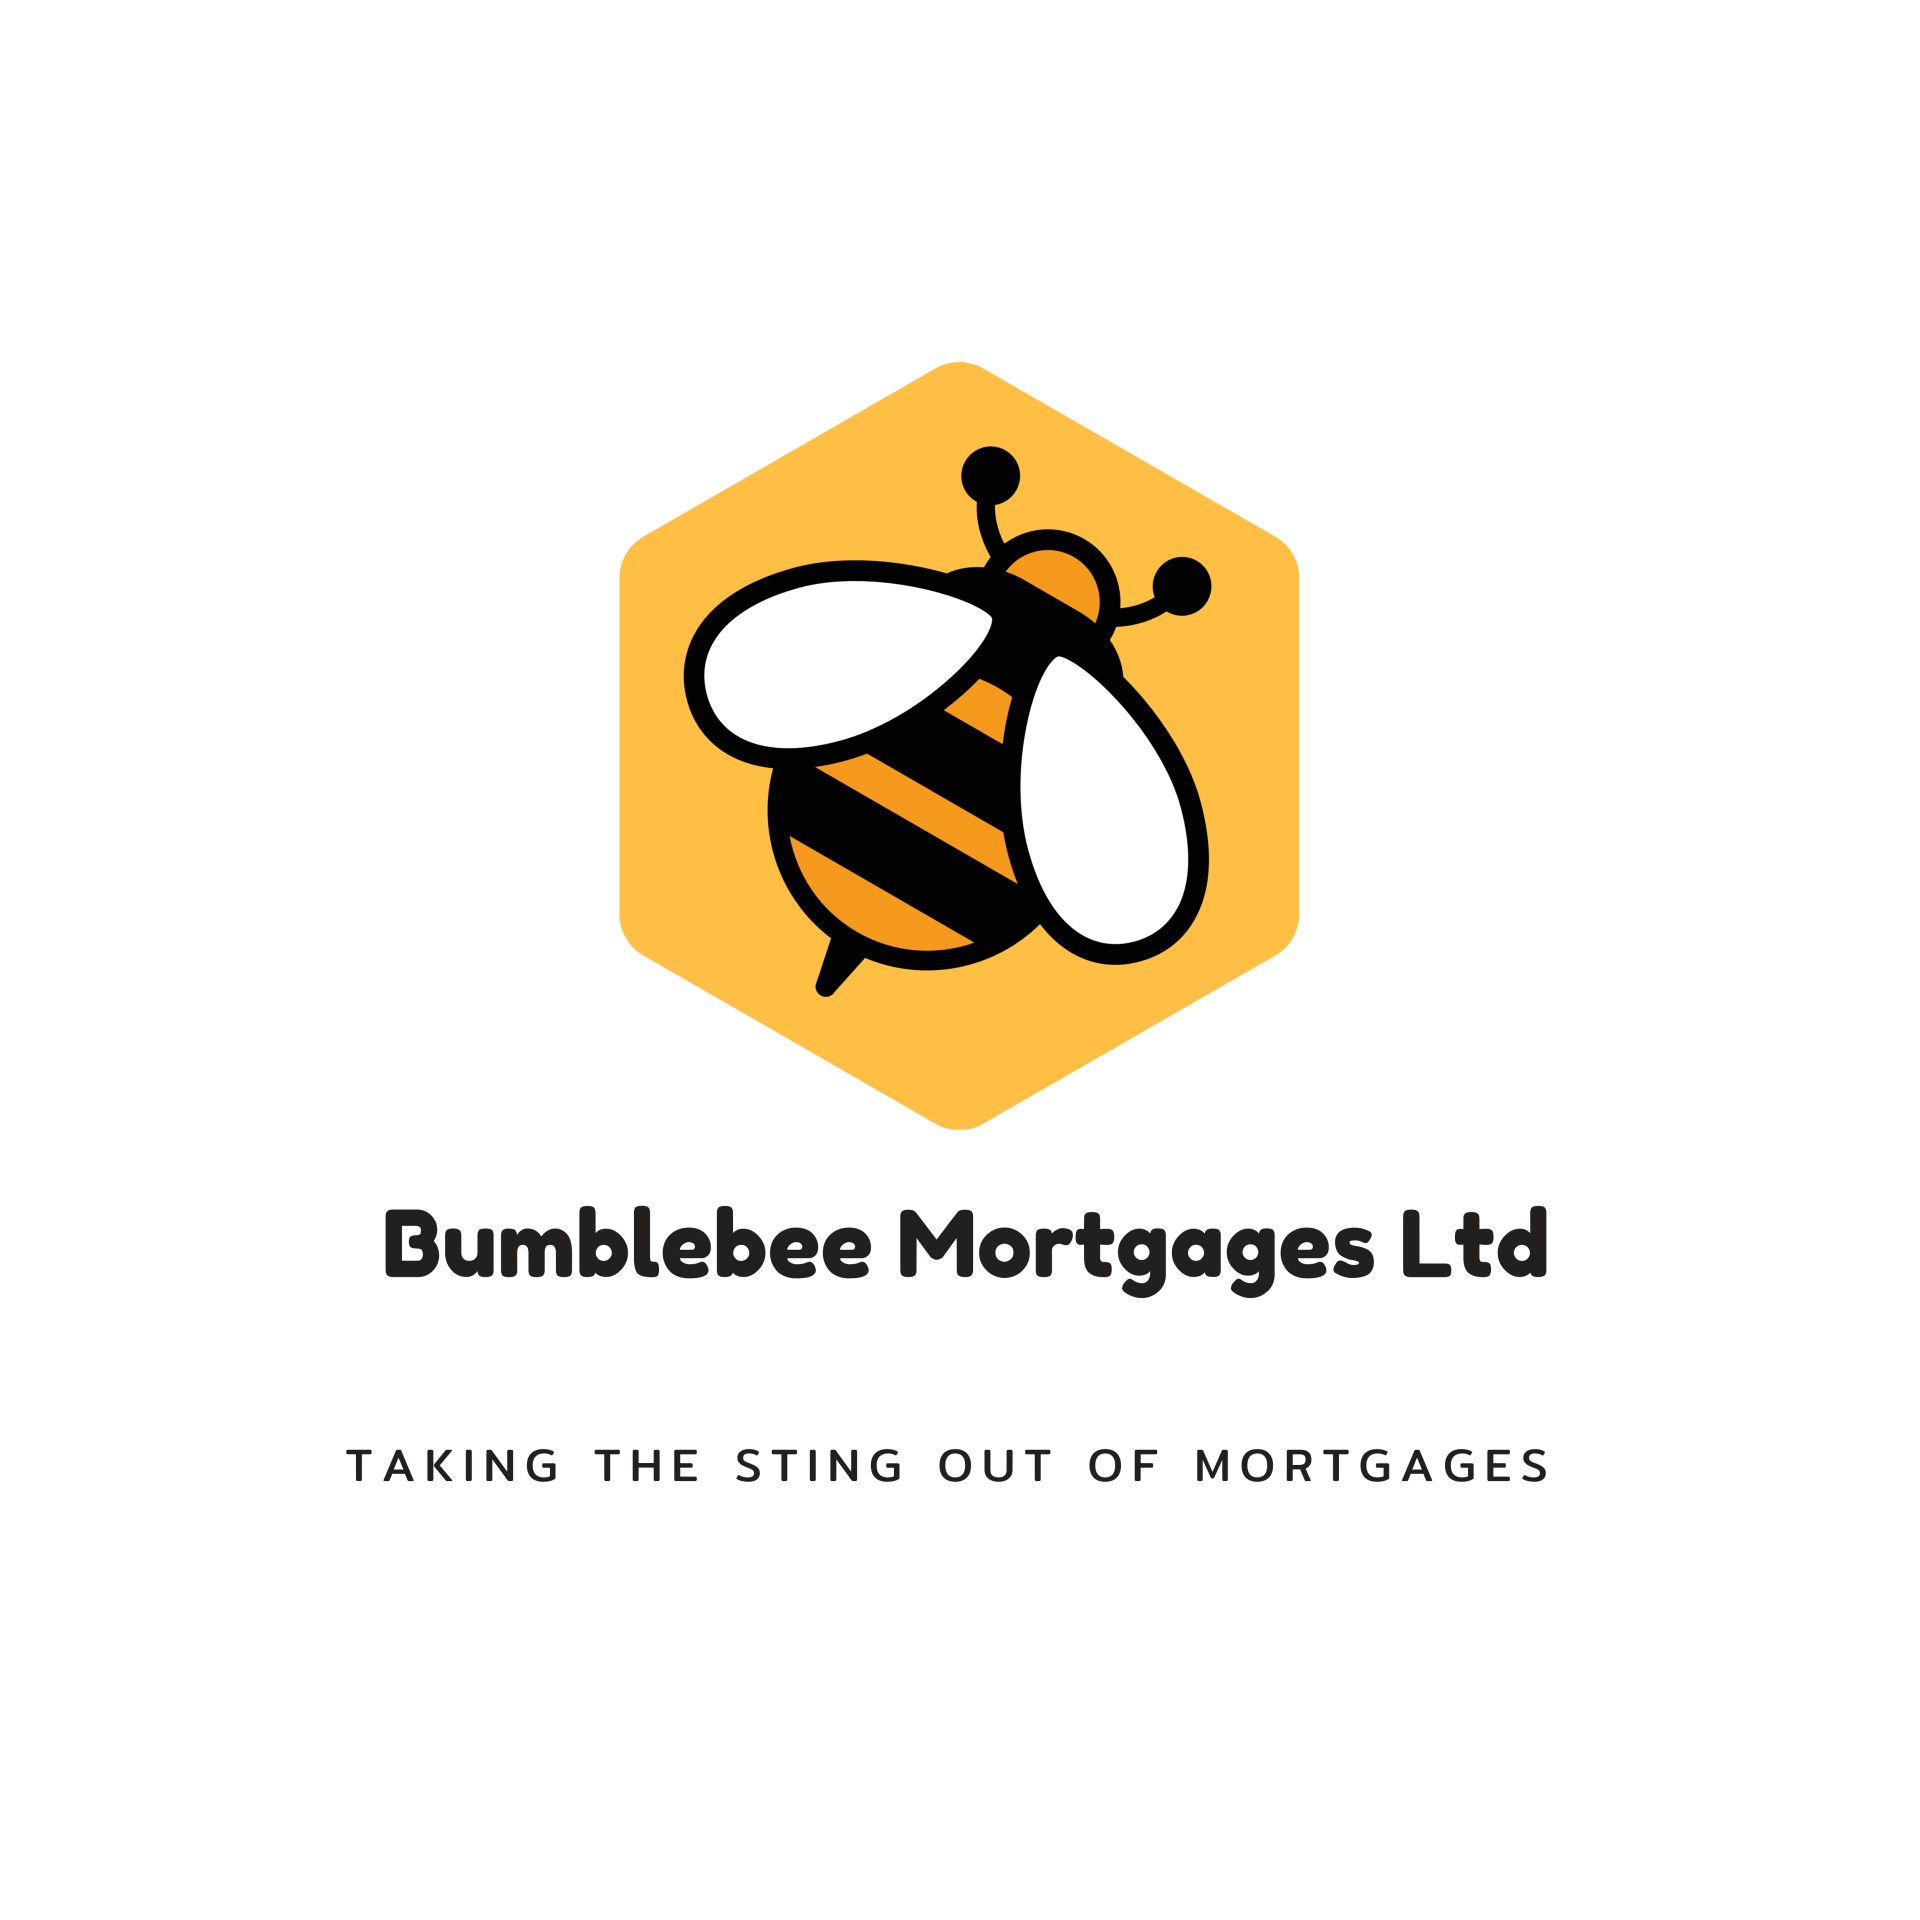 Bumblebee Mortgages